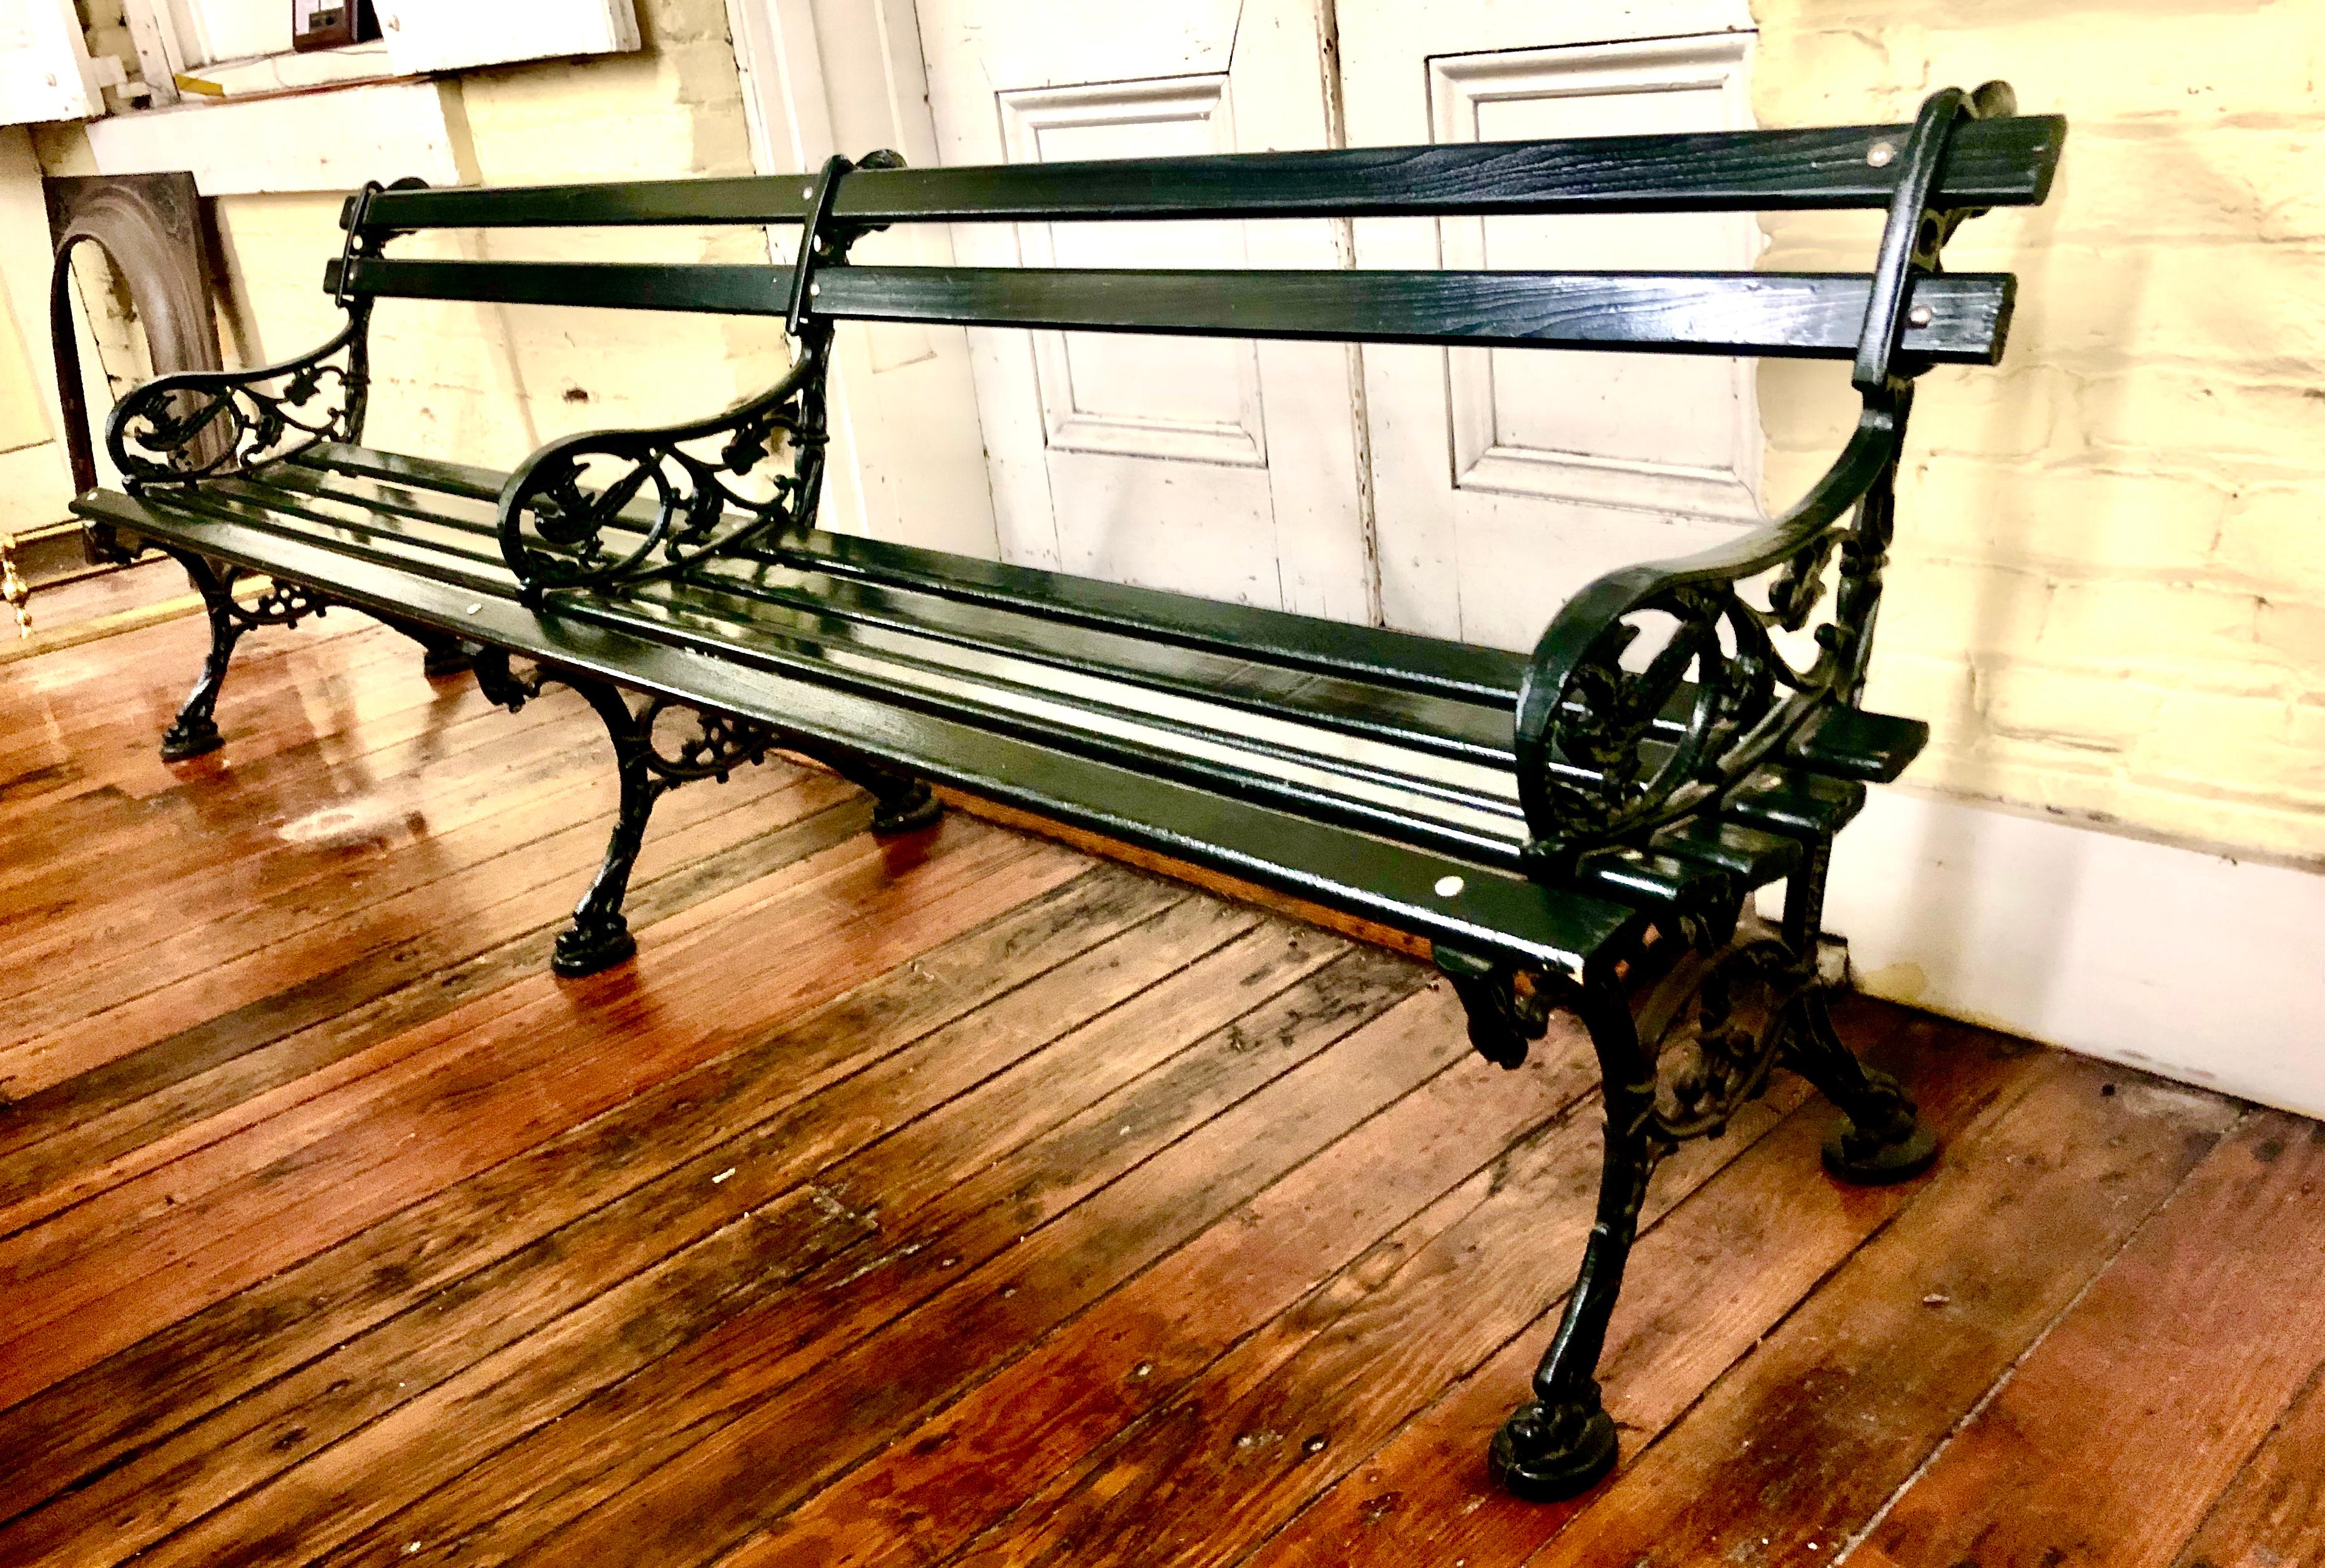 This is the original Charleston Battery Bench with heaviest weight cast iron sides made from the 19th century original pattern and durable South Carolina cypress slats. It is hand painted in our dip tank (not thinly spray-painted) with the best